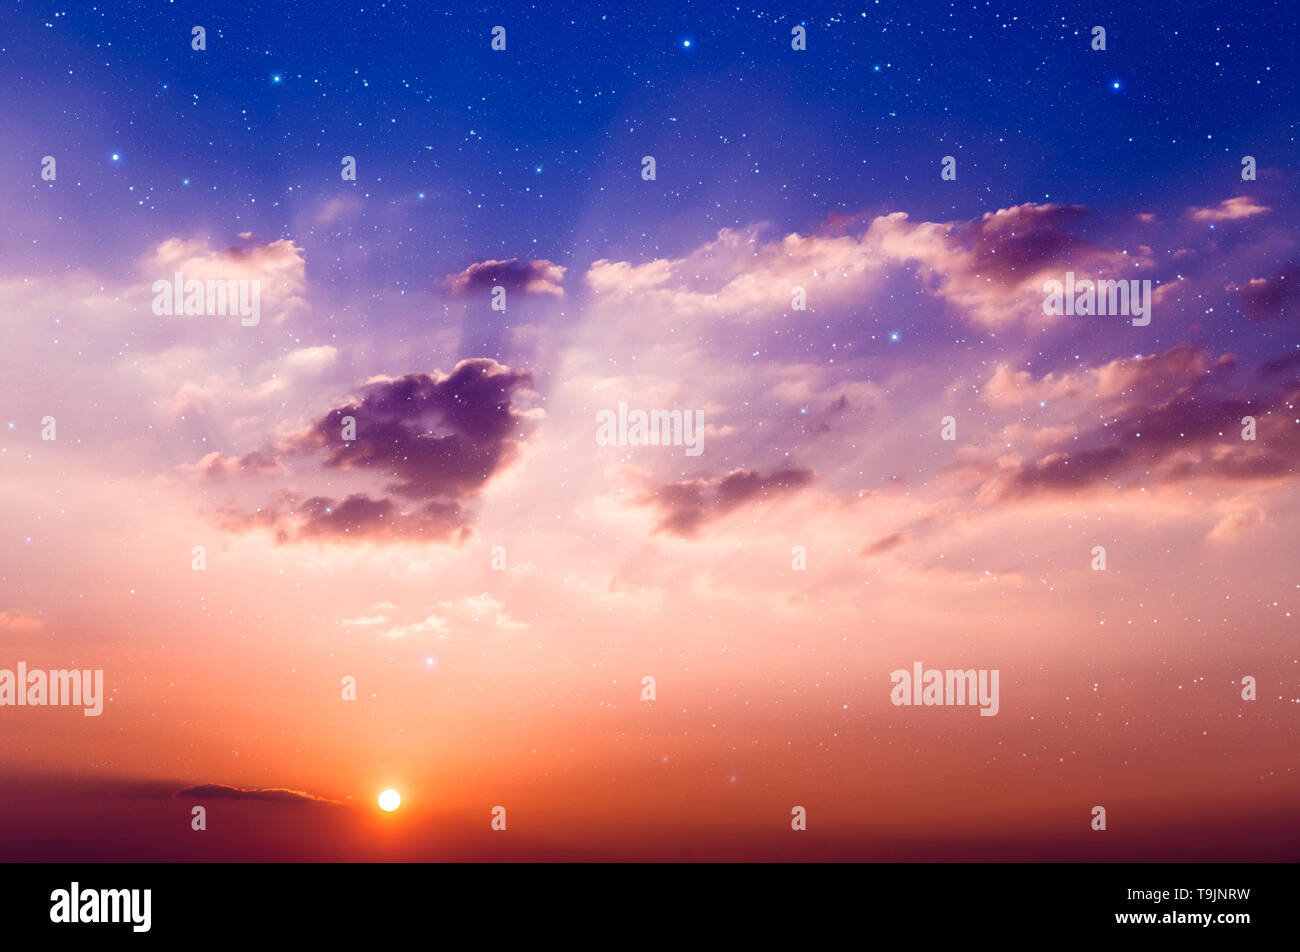 Sunset with sun, clouds and light rays. With stars on background. Stock Photo